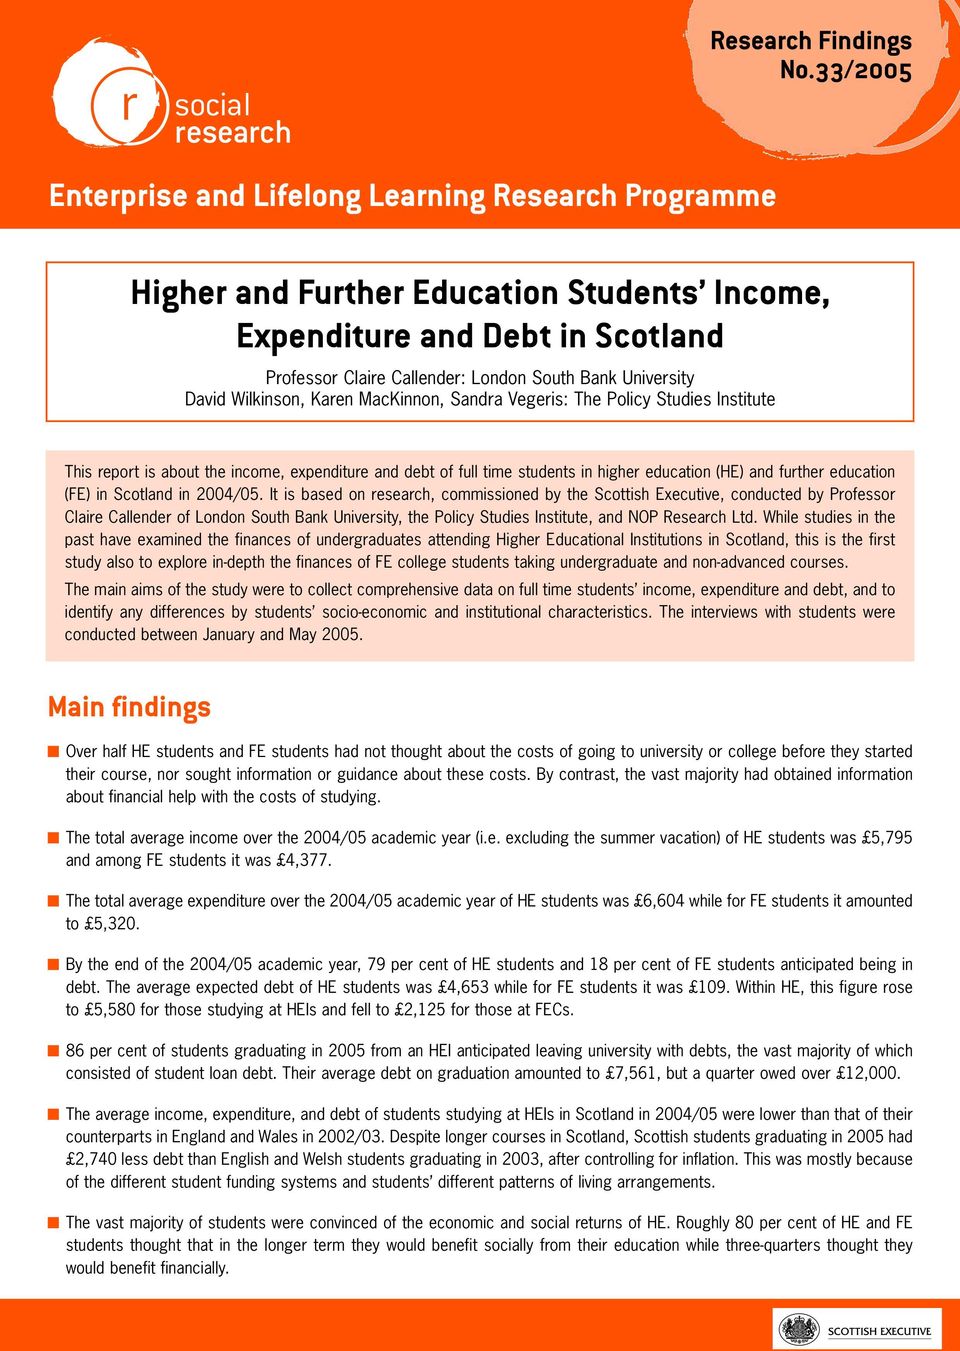 David Wilkinson, Karen MacKinnon, Sandra Vegeris: The Policy Studies Institute This report is about the income, expenditure and debt of full time students in higher education (HE) and further